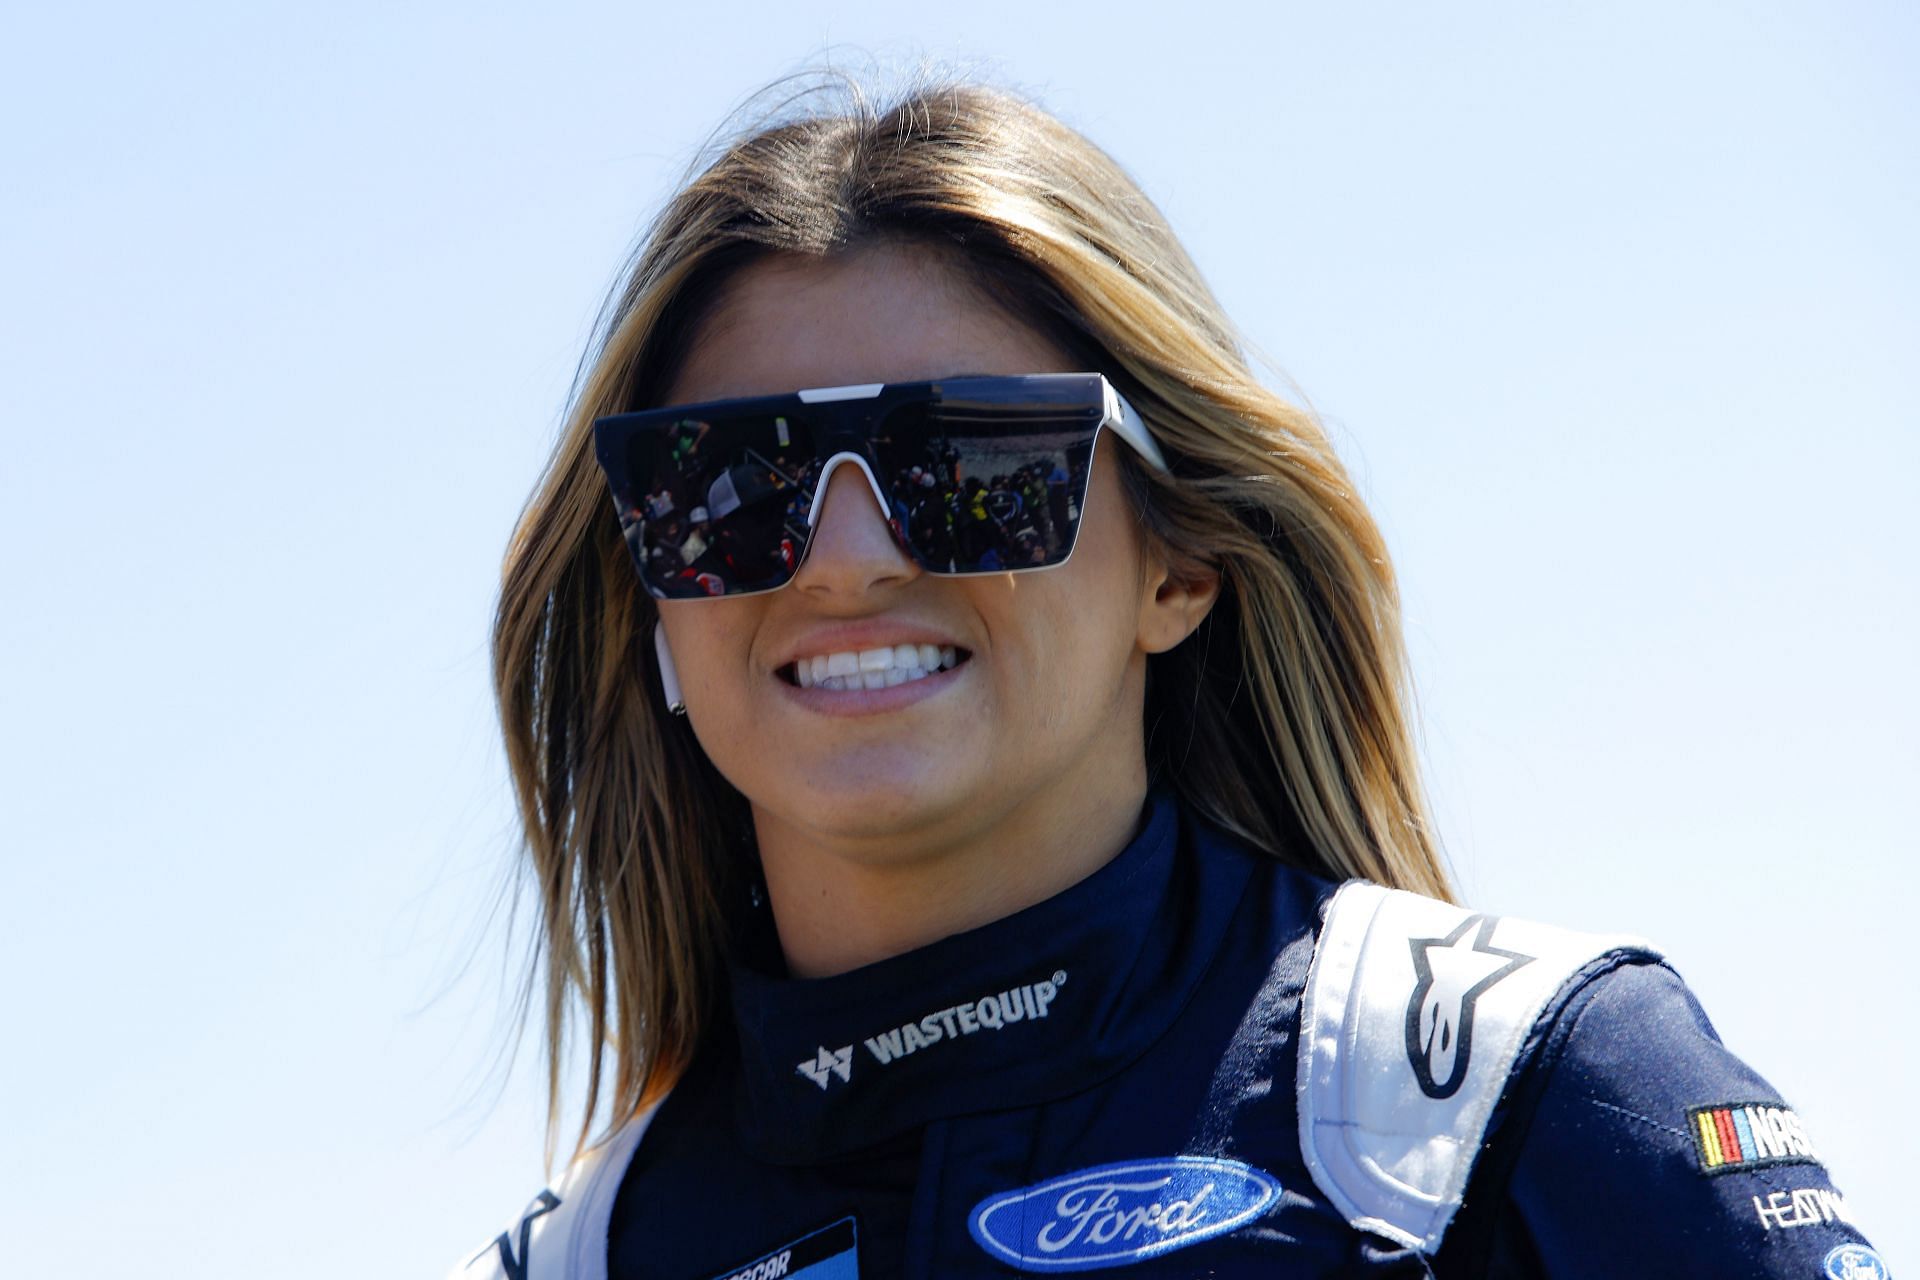 Hailie Deegan walks onstage during driver intros prior to the NASCAR Camping World Truck Series Fr8 208 at Atlanta Motor Speedway.